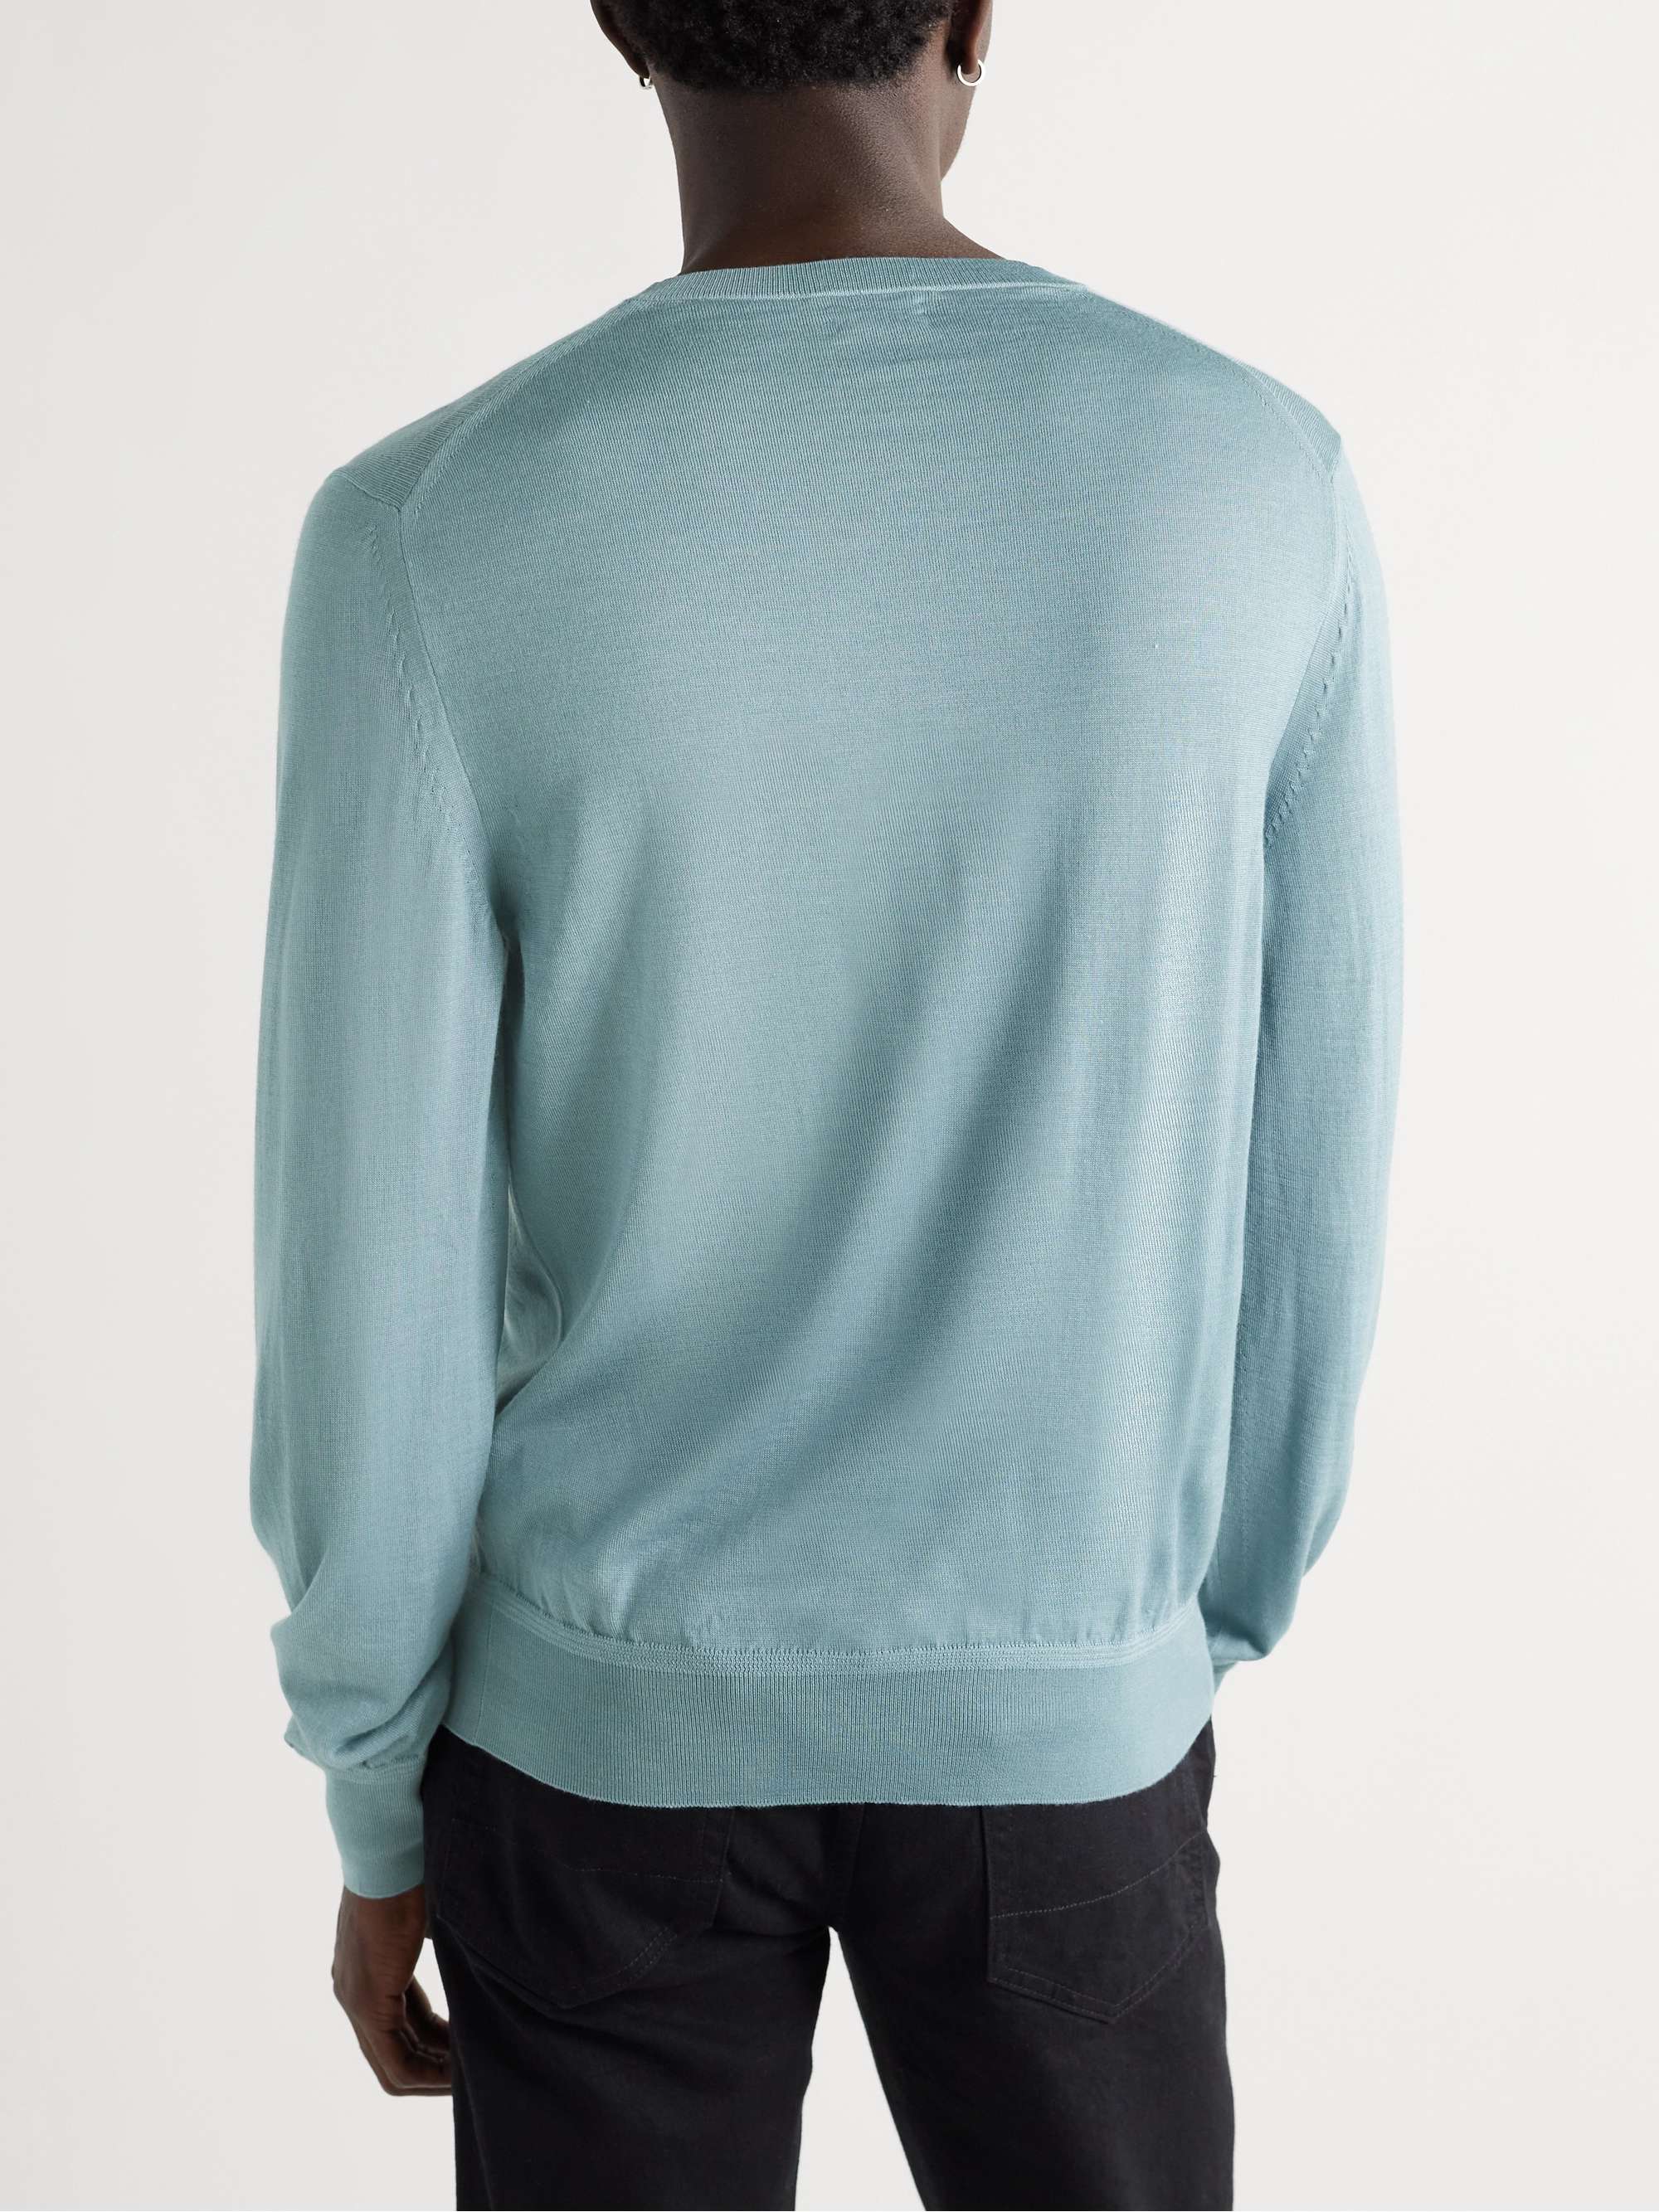 TOM FORD Cashmere and Silk-Blend Sweater